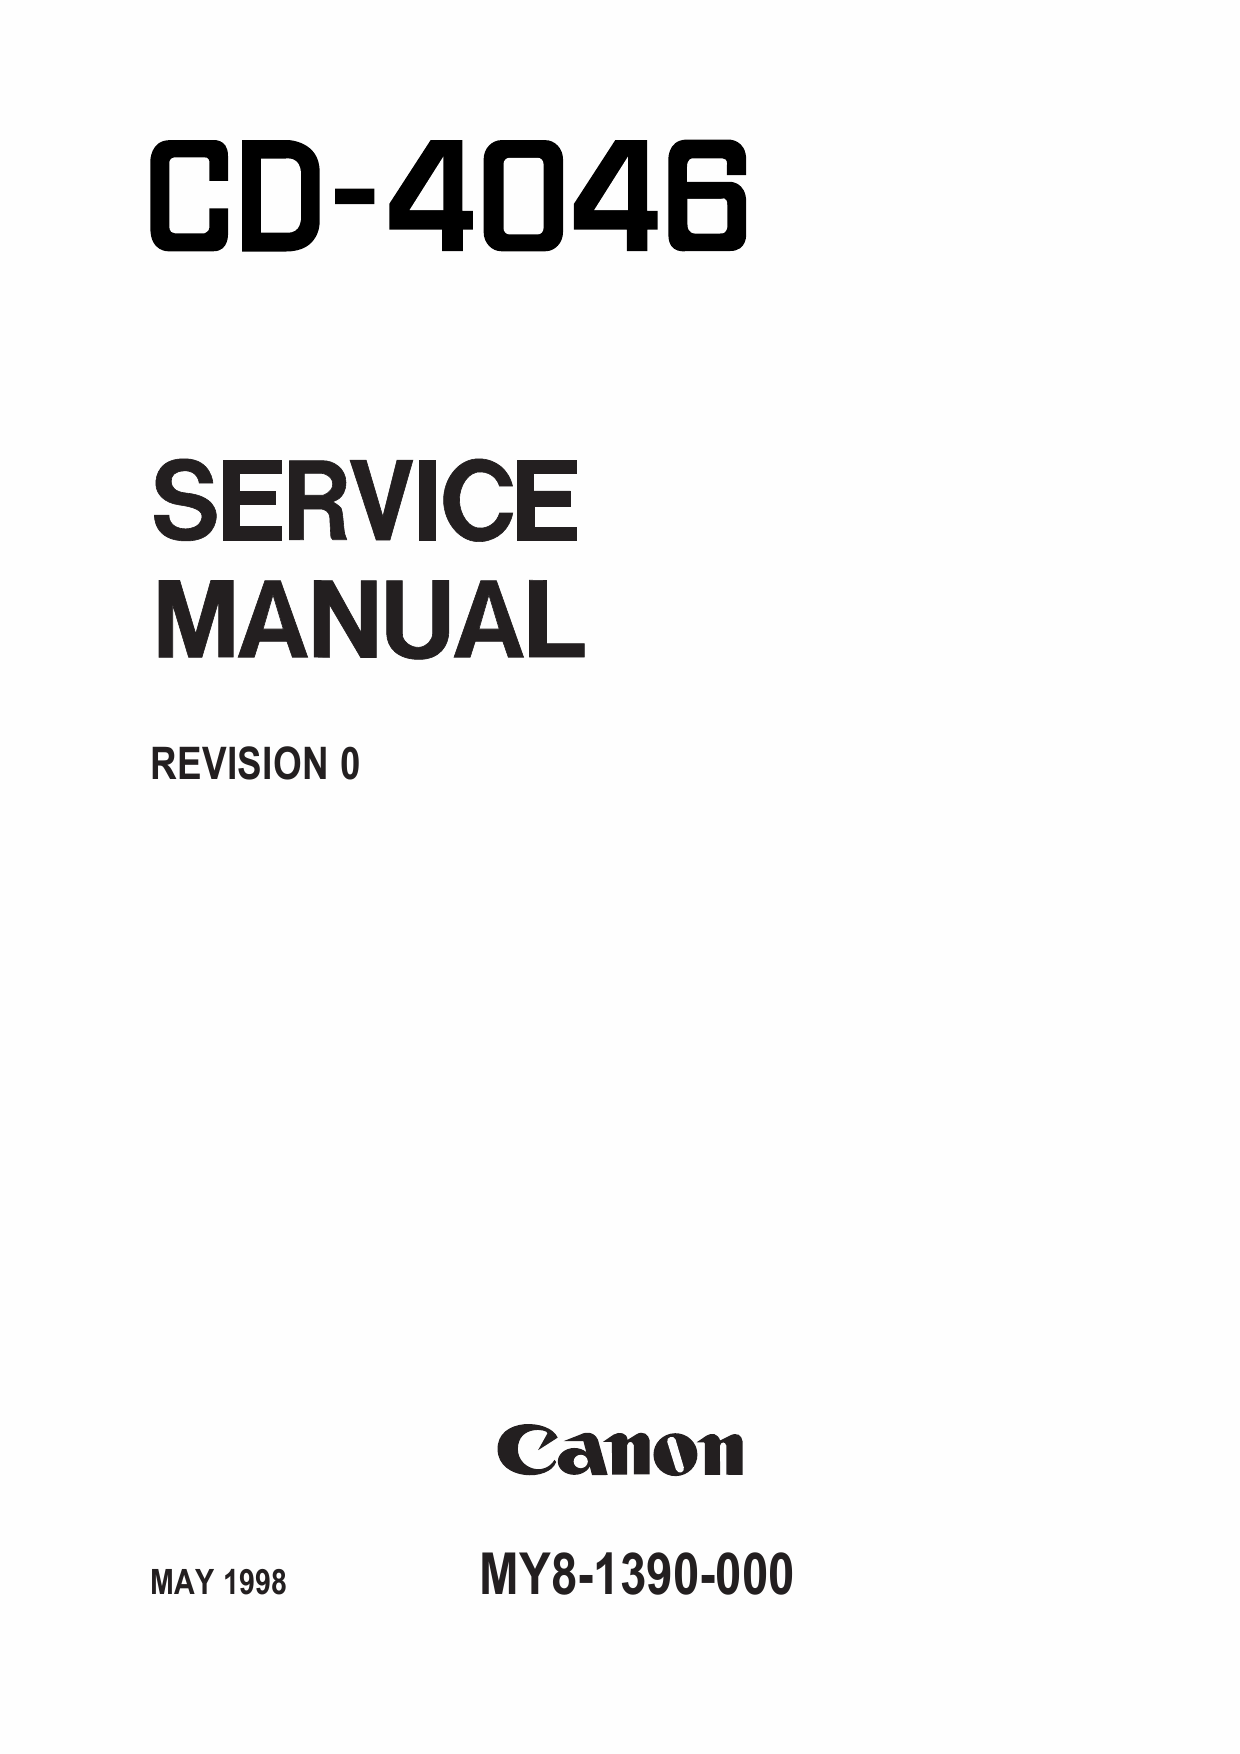 Canon Options CD-4046 Document-Scanner Parts and Service Manual-1